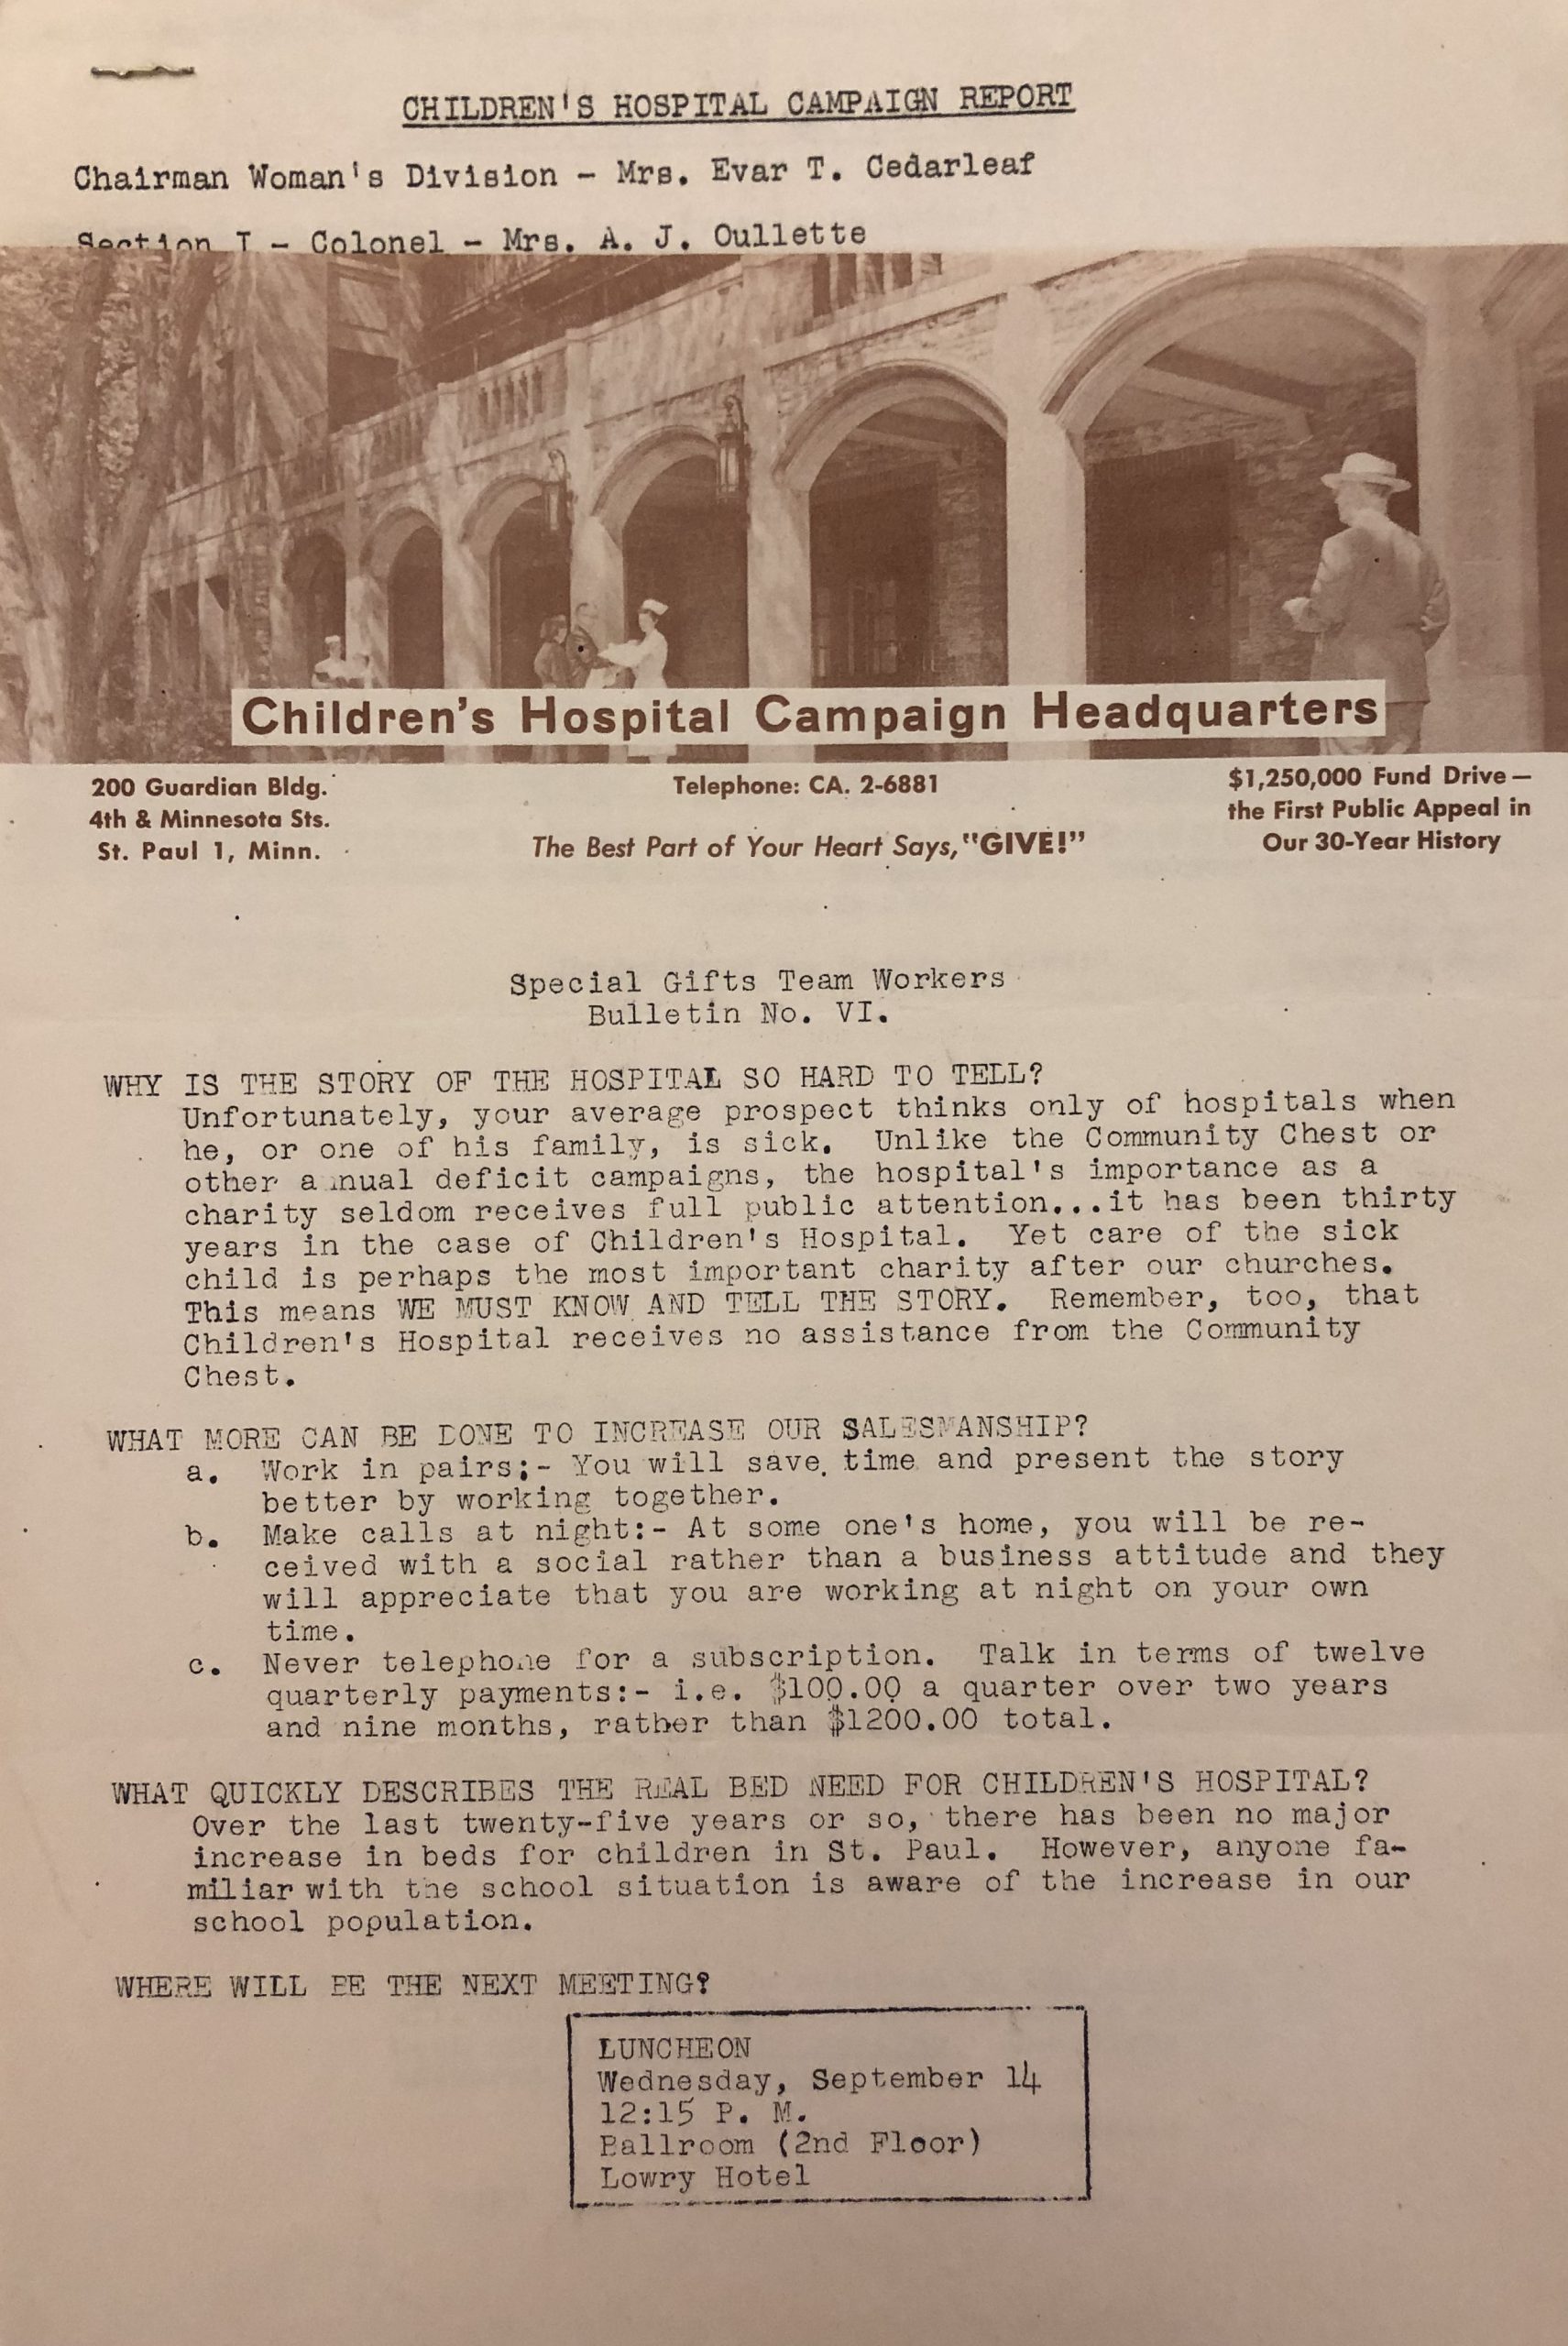 1955 internal fundraising campaign report